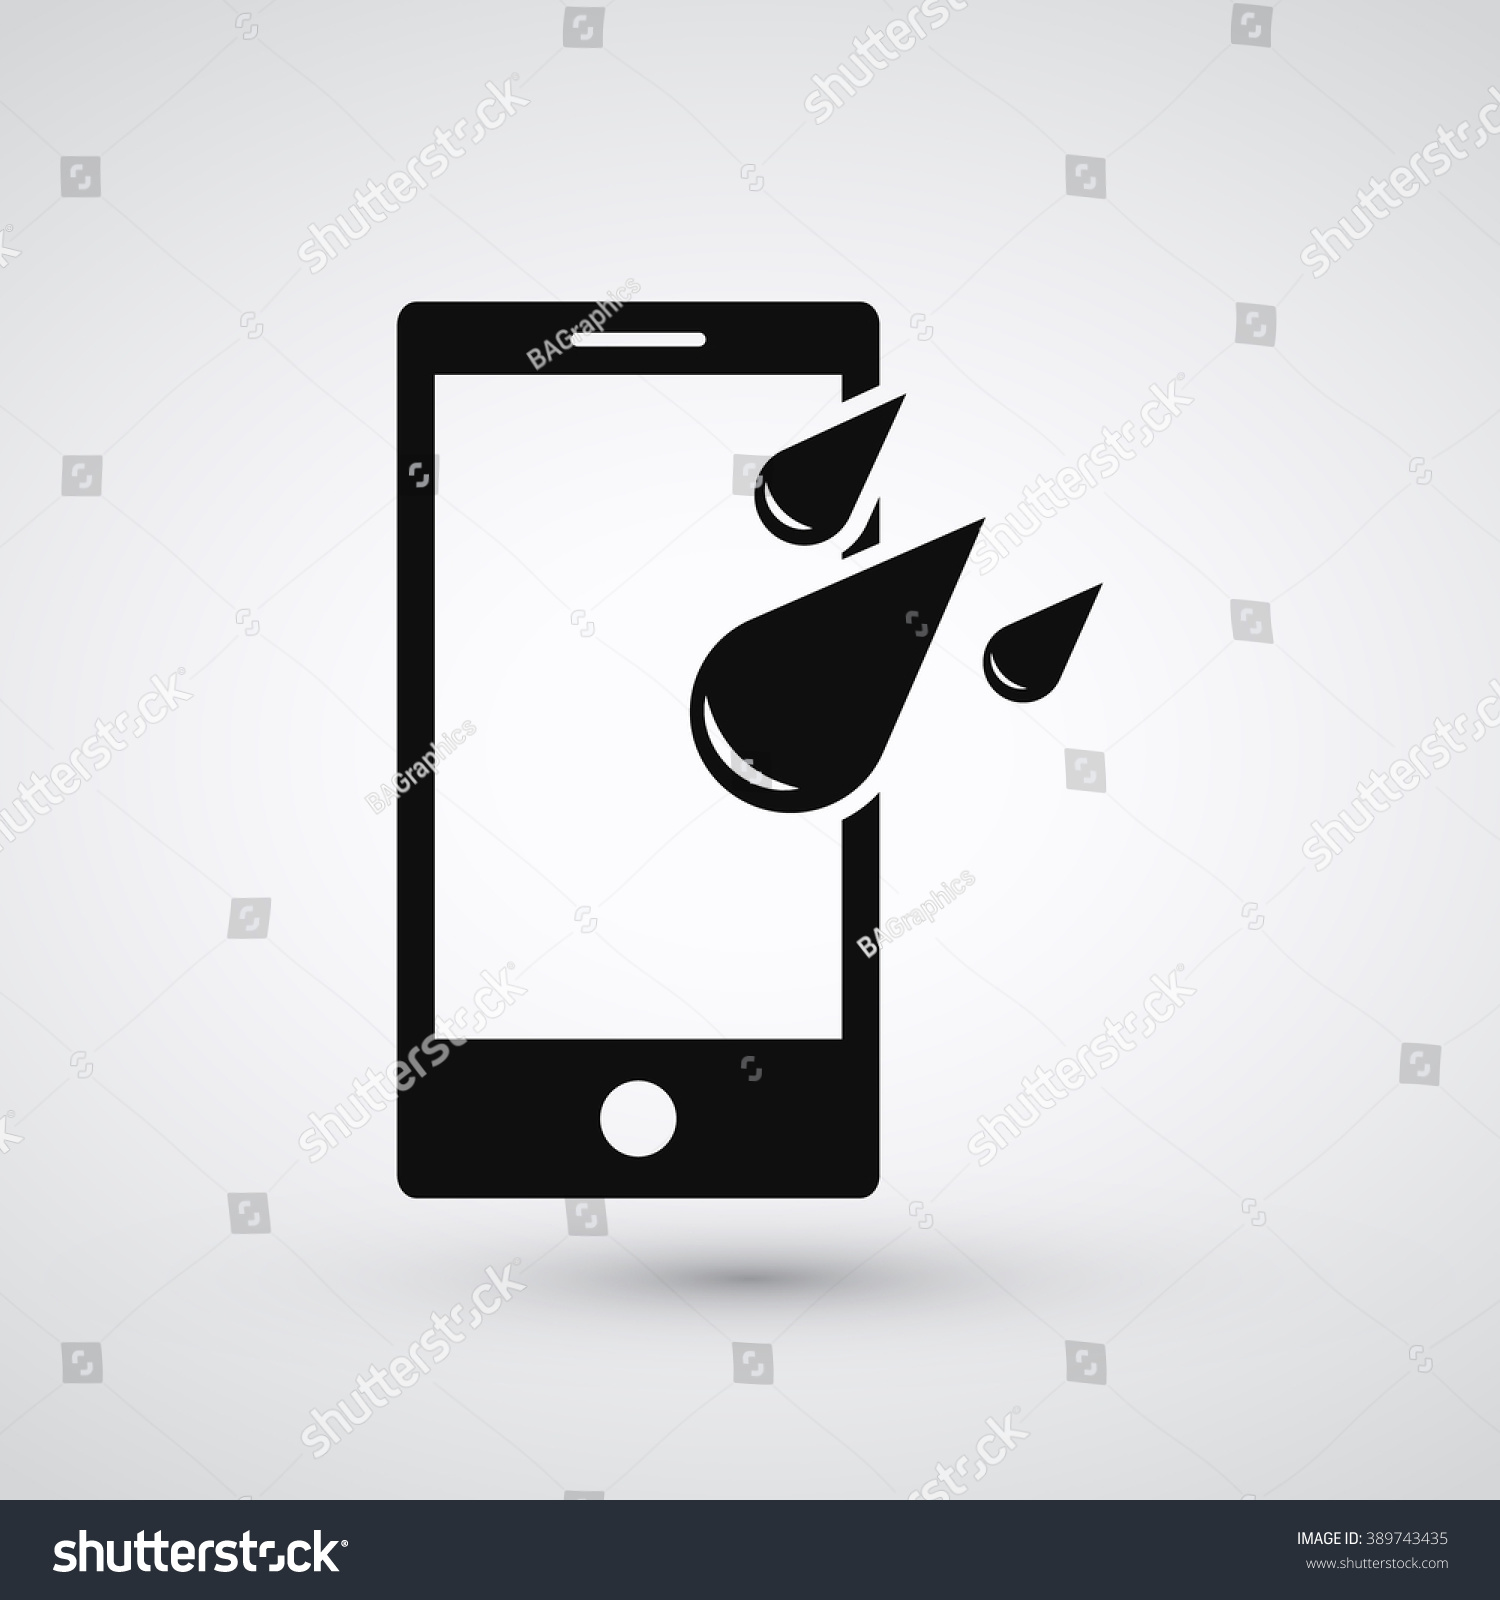 SVG of Phone and Water Blobs Icon | Phone is waterproof | Device protection from liquid | Vector Icon Element Graphic Illustration Design. Compatible with ai, cdr, jpg, png, svg, pdf, ico and eps. svg